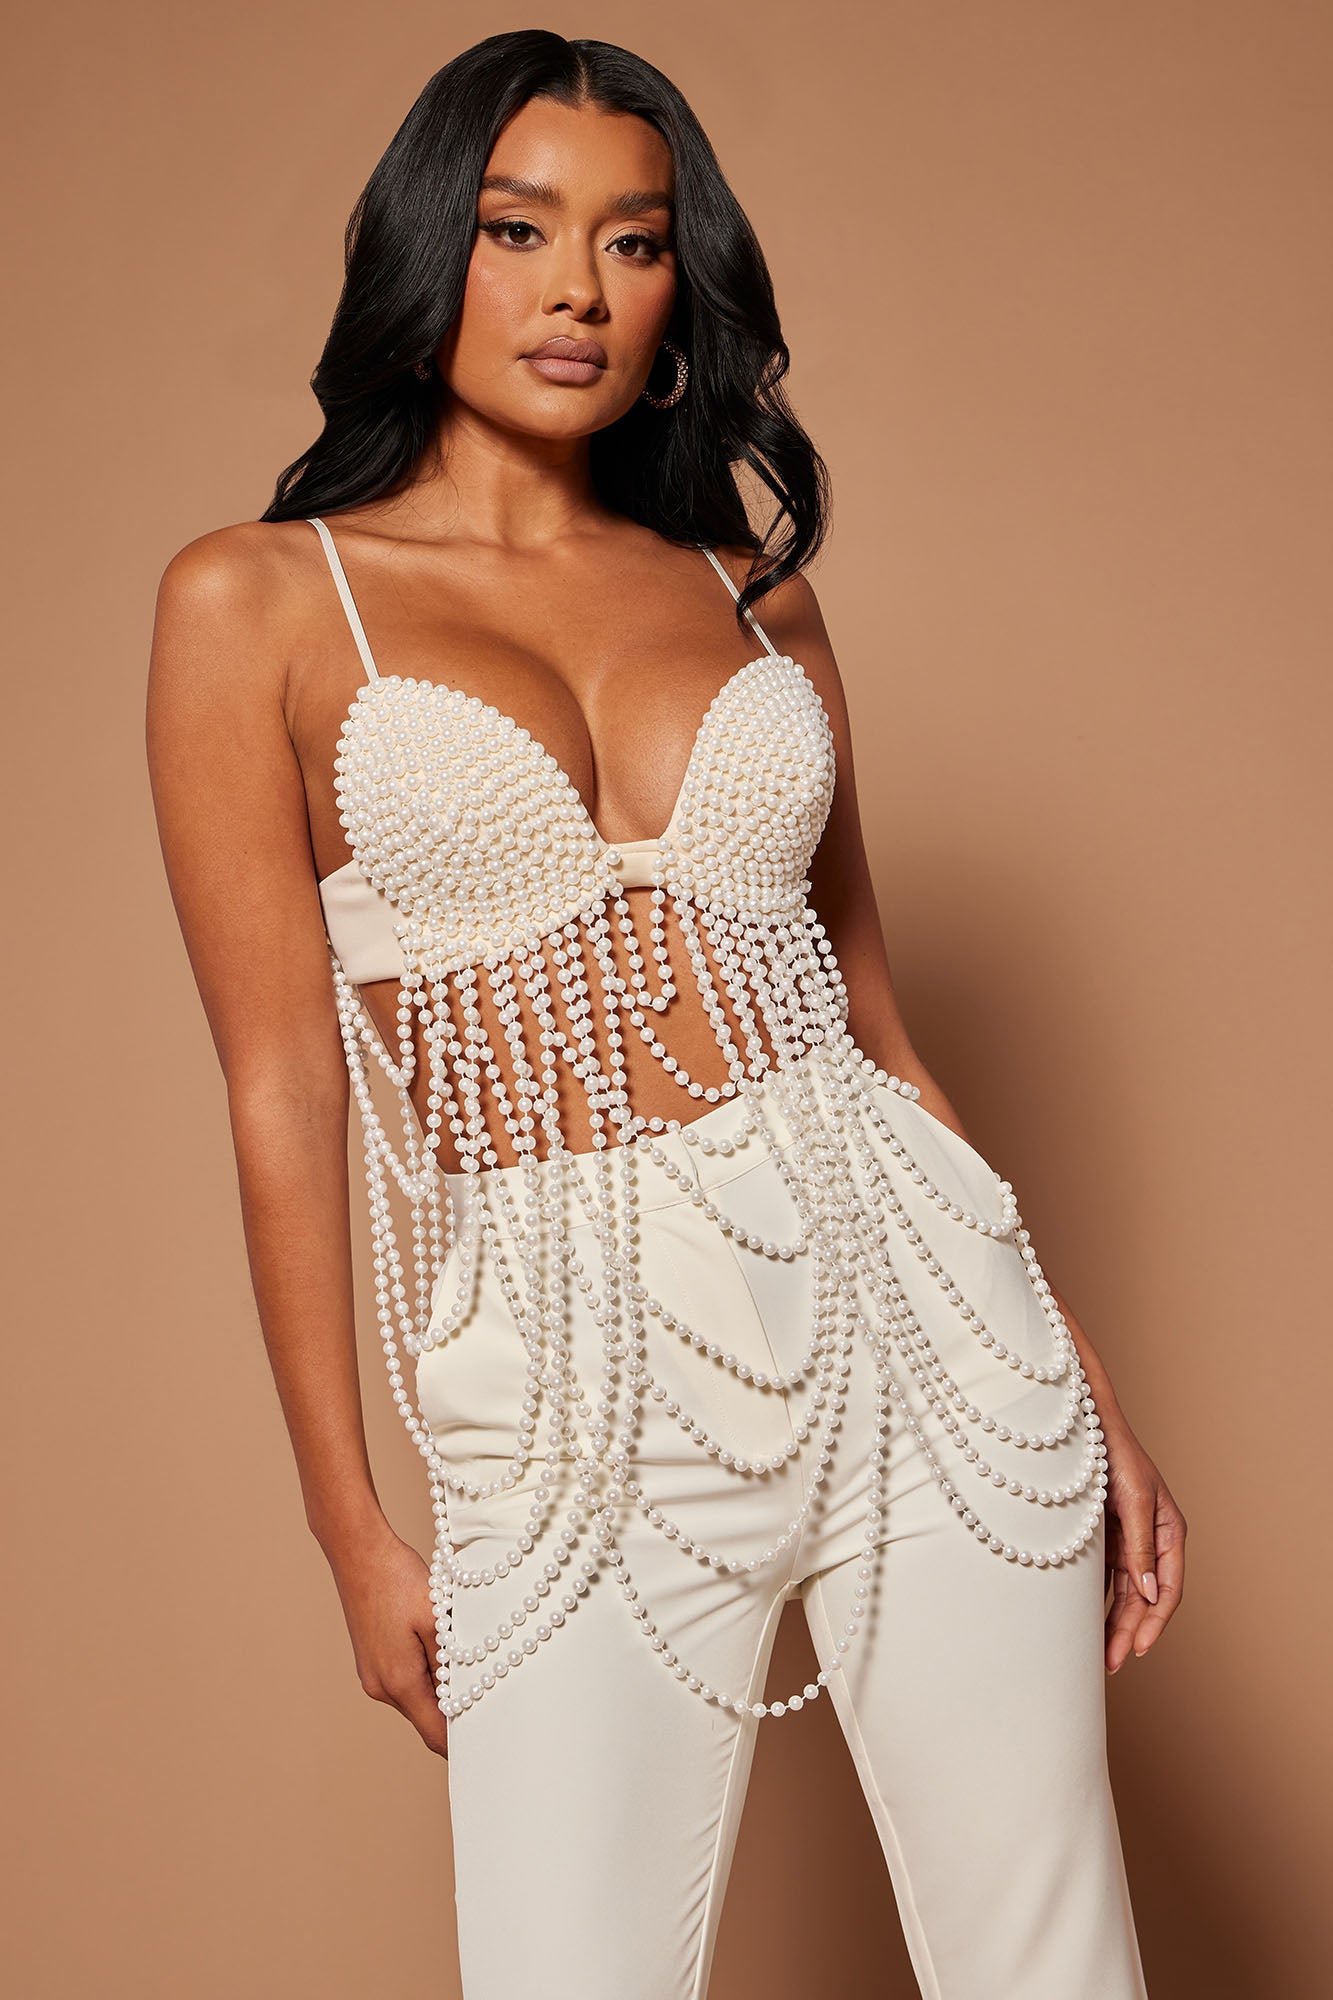 Pearl Crop Top for Women Pearl Bralette Tops V-Neck Backless